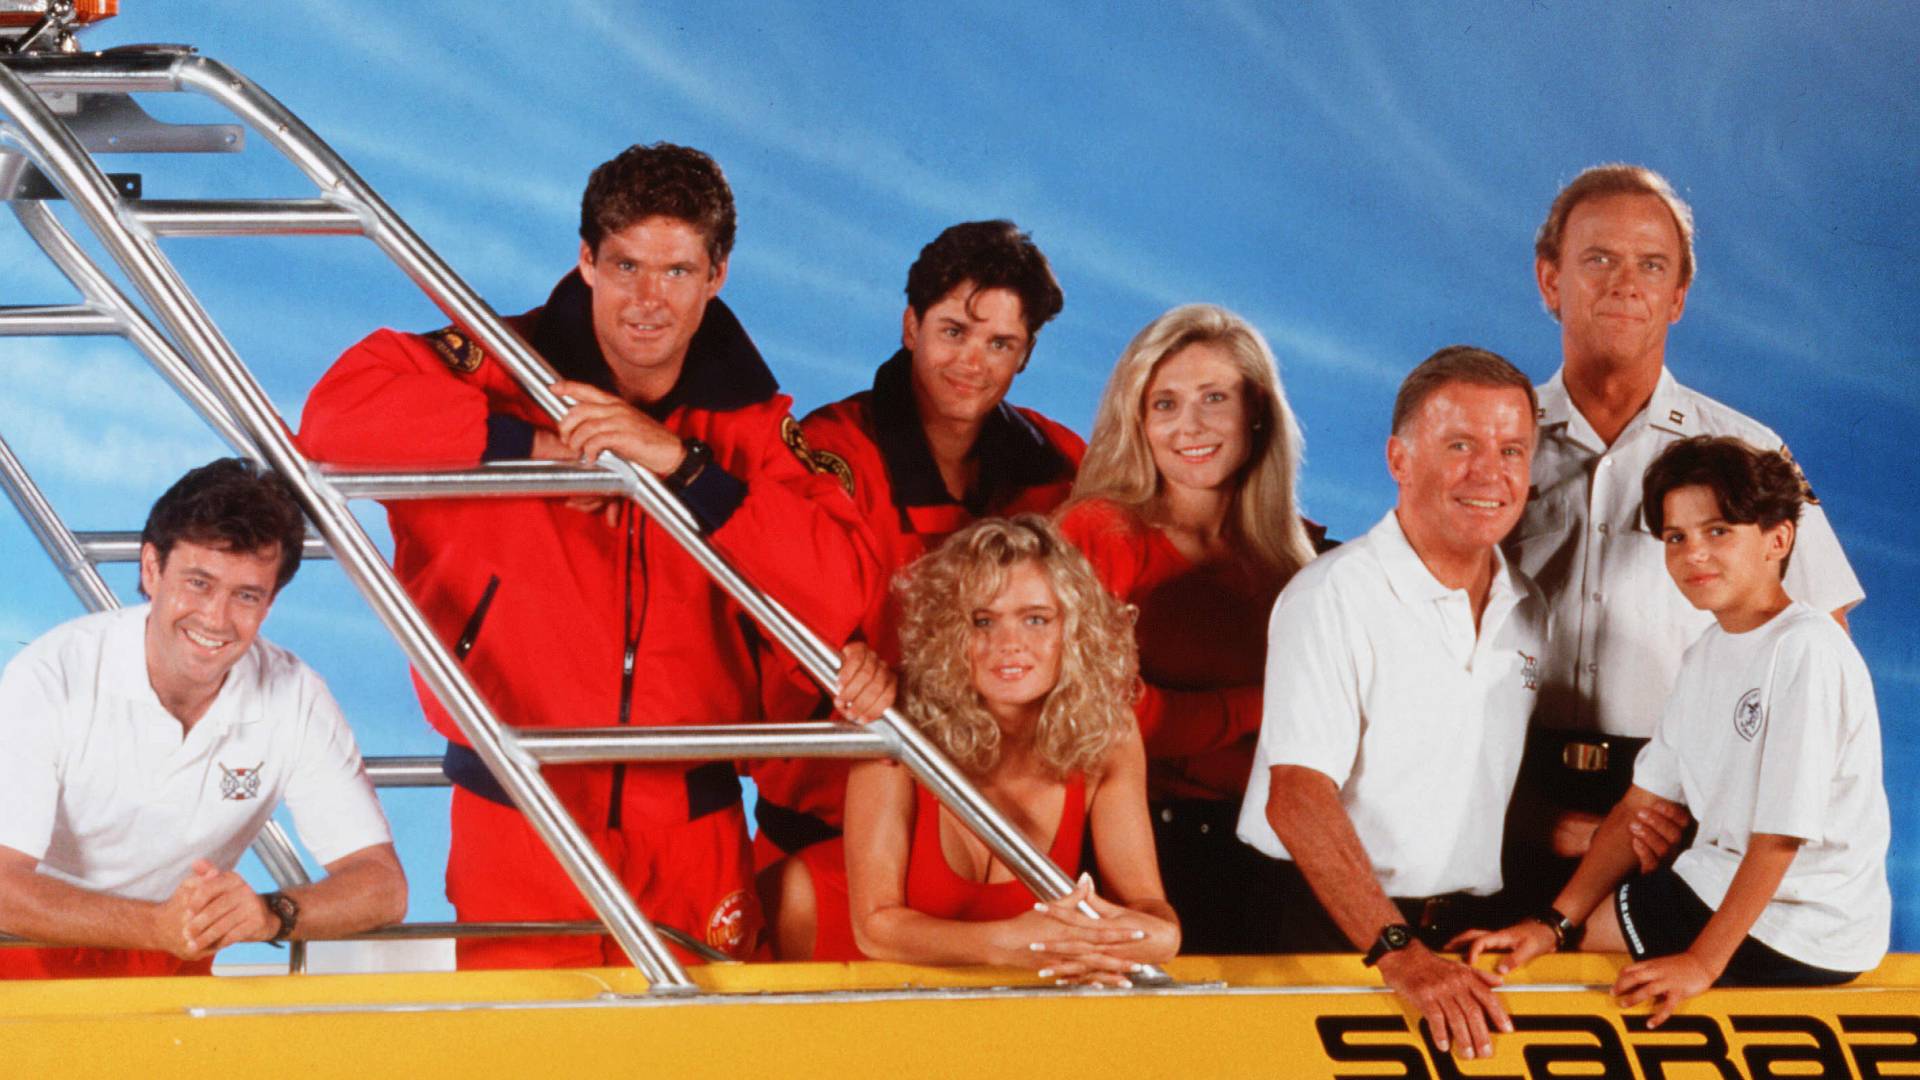 'Baywatch' Cast Now Where Are David Hasselhoff and Other Stars?